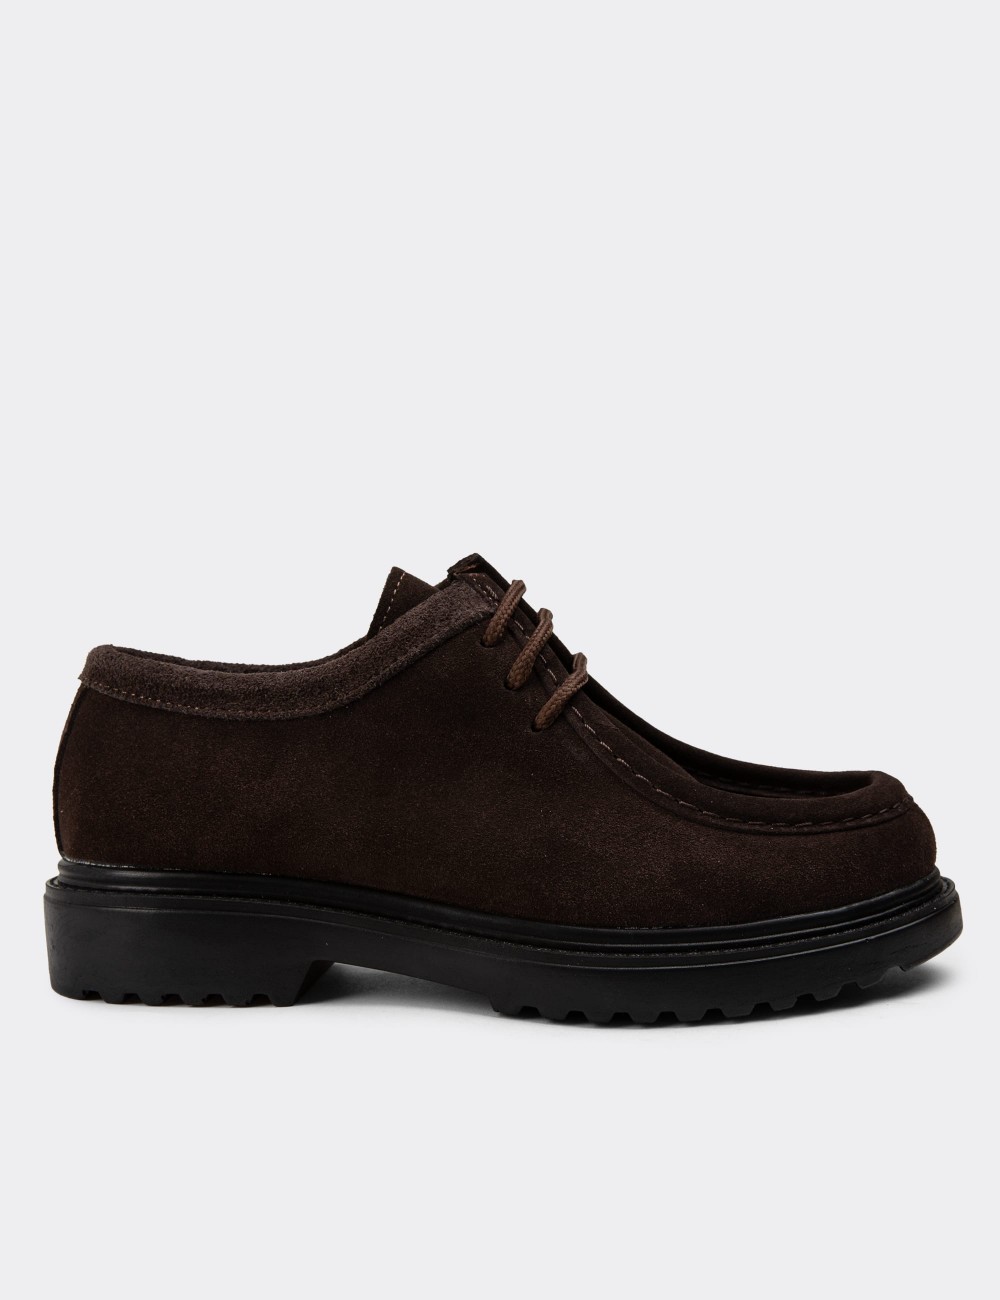 Brown Suede Leather Lace-up Shoes - 01935ZKHVC02